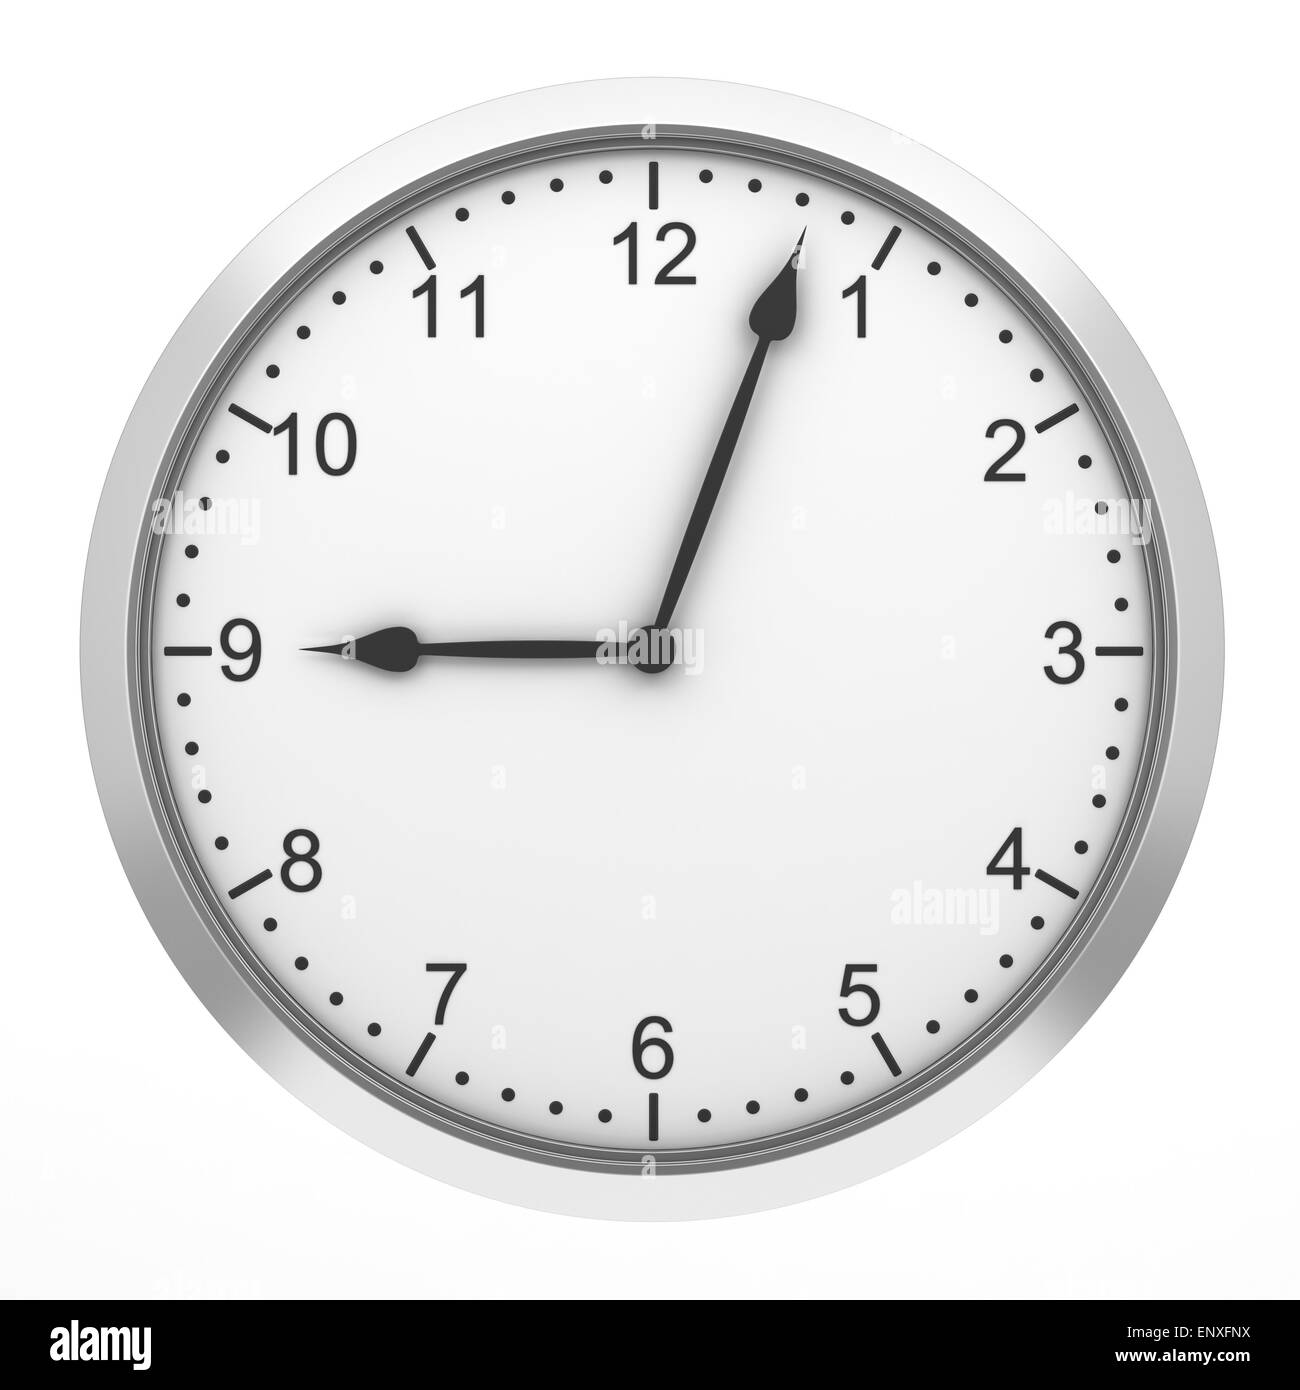 round wall clock isolated on white background Stock Photo